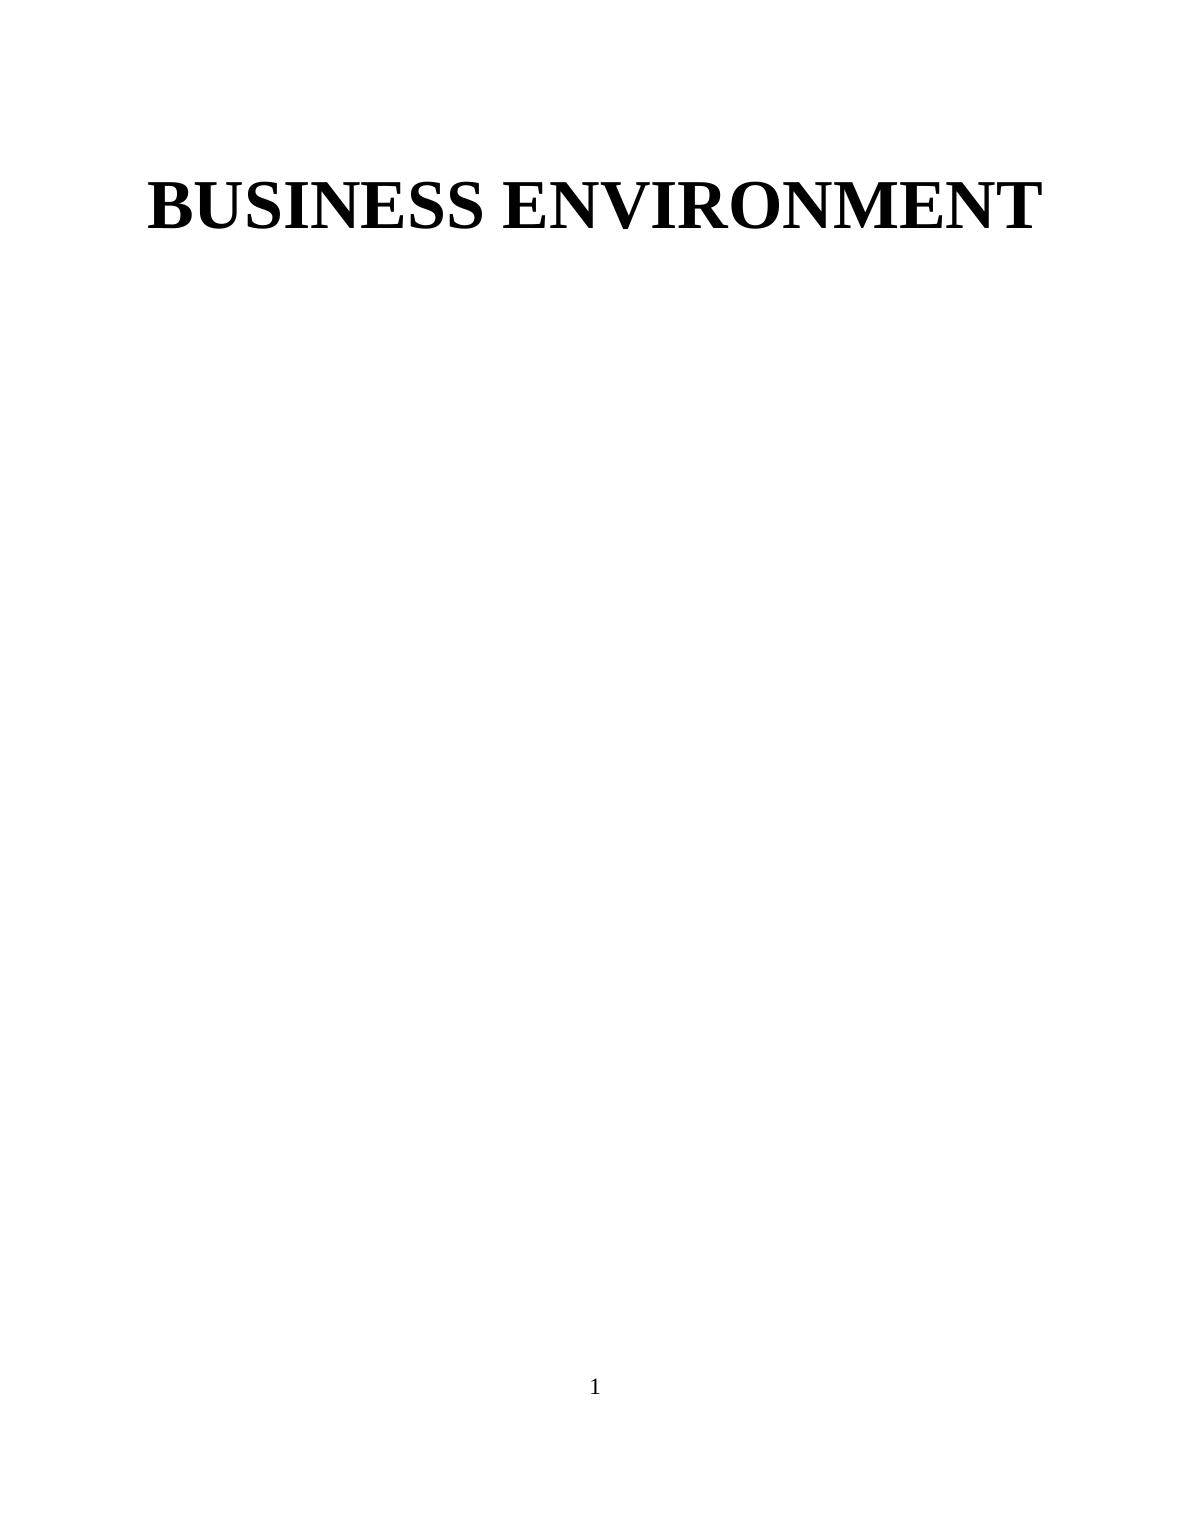 Report on Business Environment in Vodafone_1